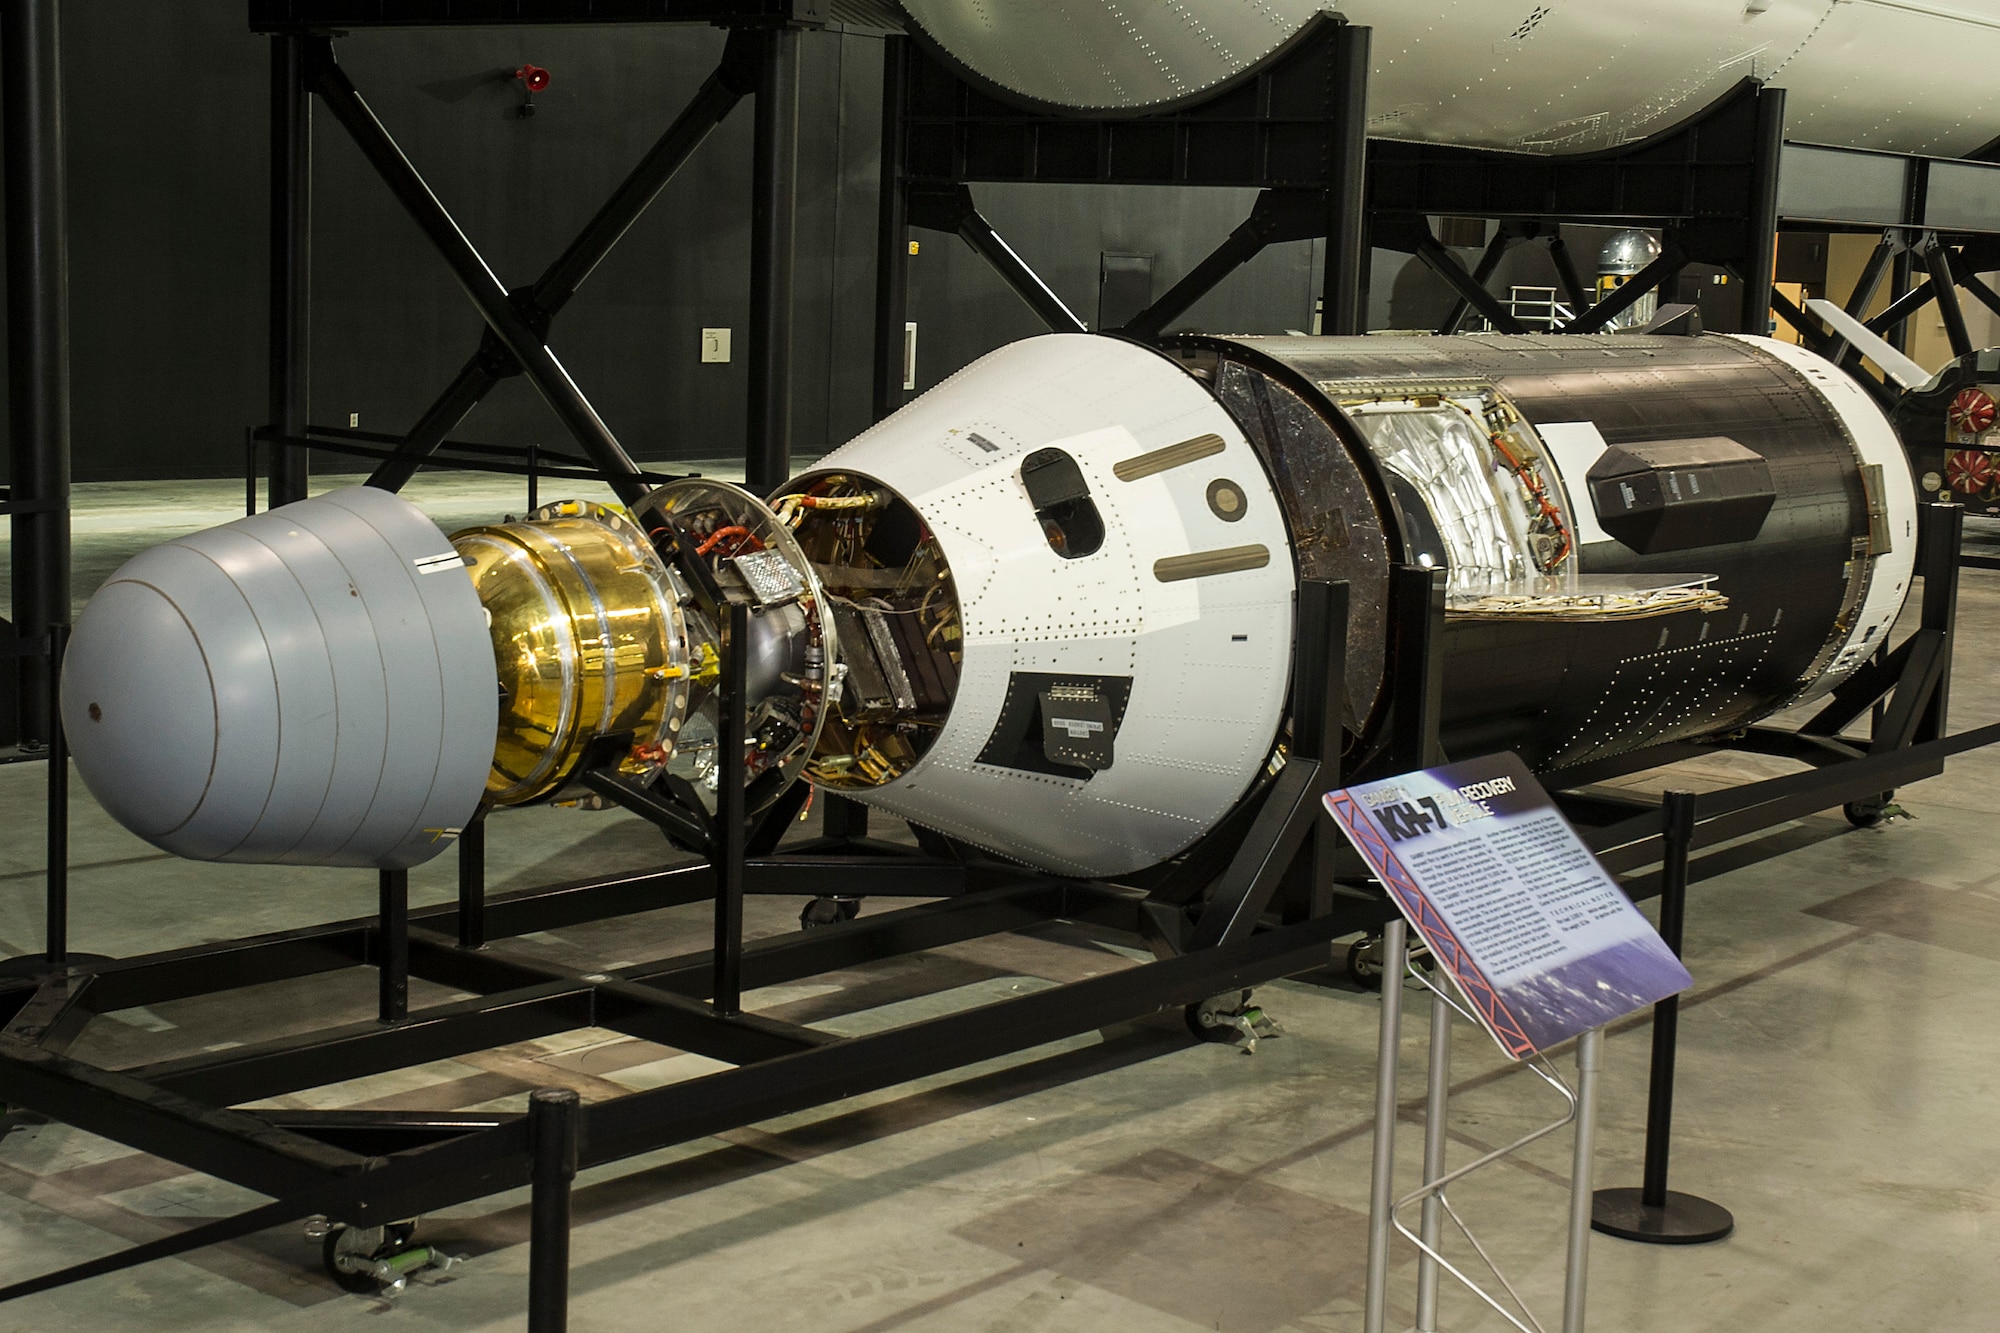 DAYTON, Ohio -- Gambit 1 KH-7 reconnaissance satellite in the Space Gallery at the National Museum of the U.S. Air Force. (U.S. Air Force Photo)